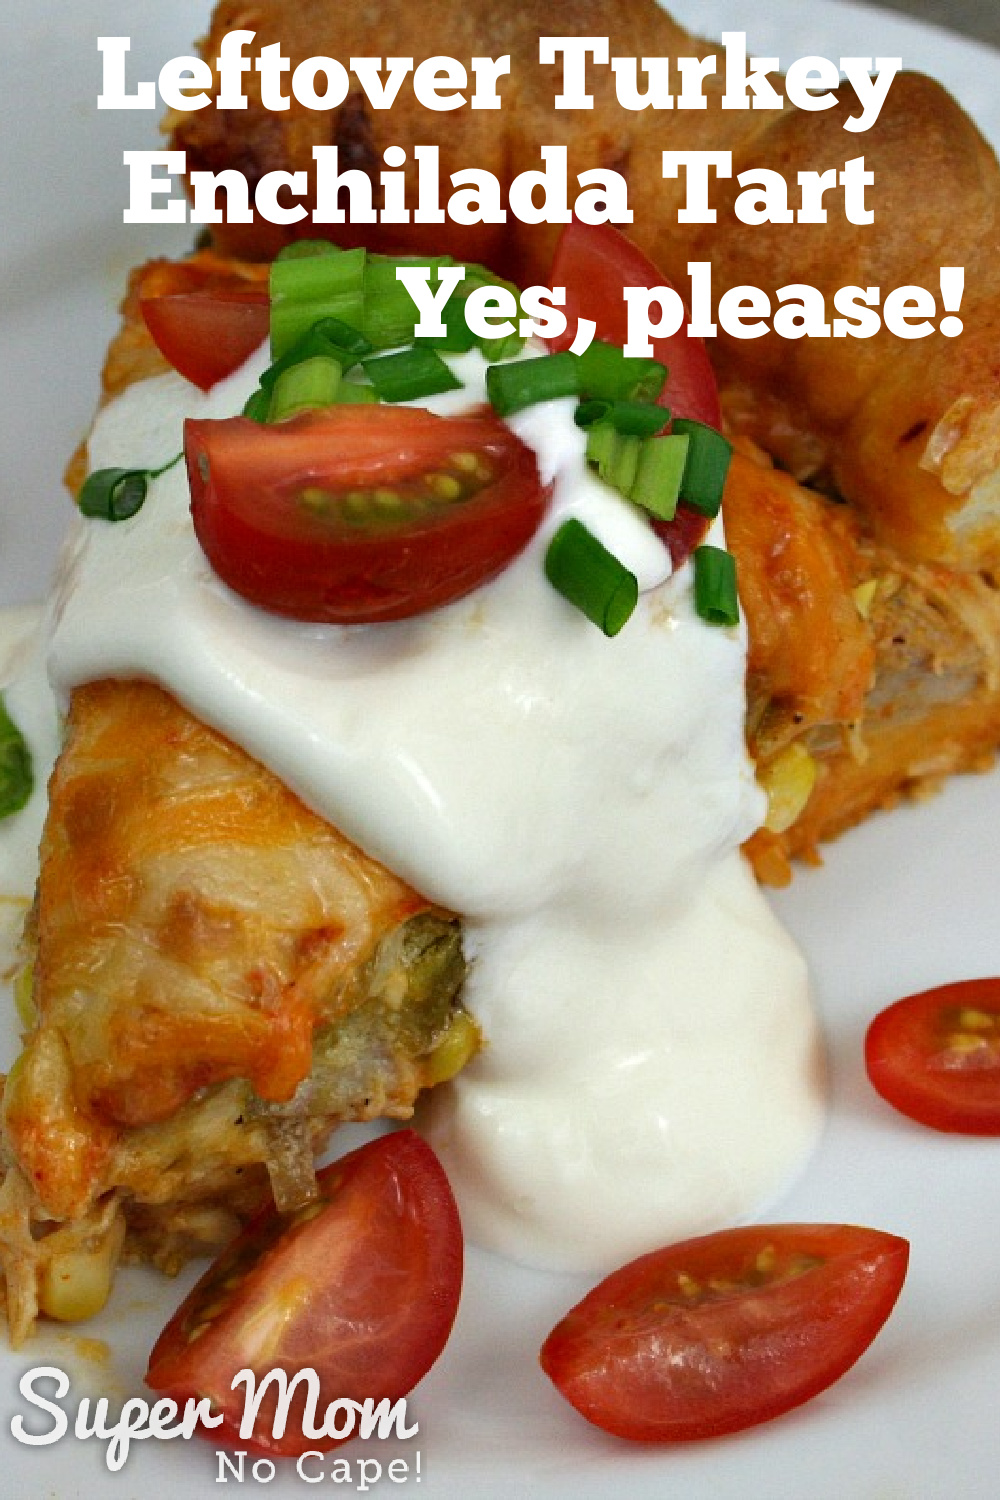 A picture of a turkey enchilada tart, with text overlay of "Leftover Turkey Enchilada Tart - Yes, please!"